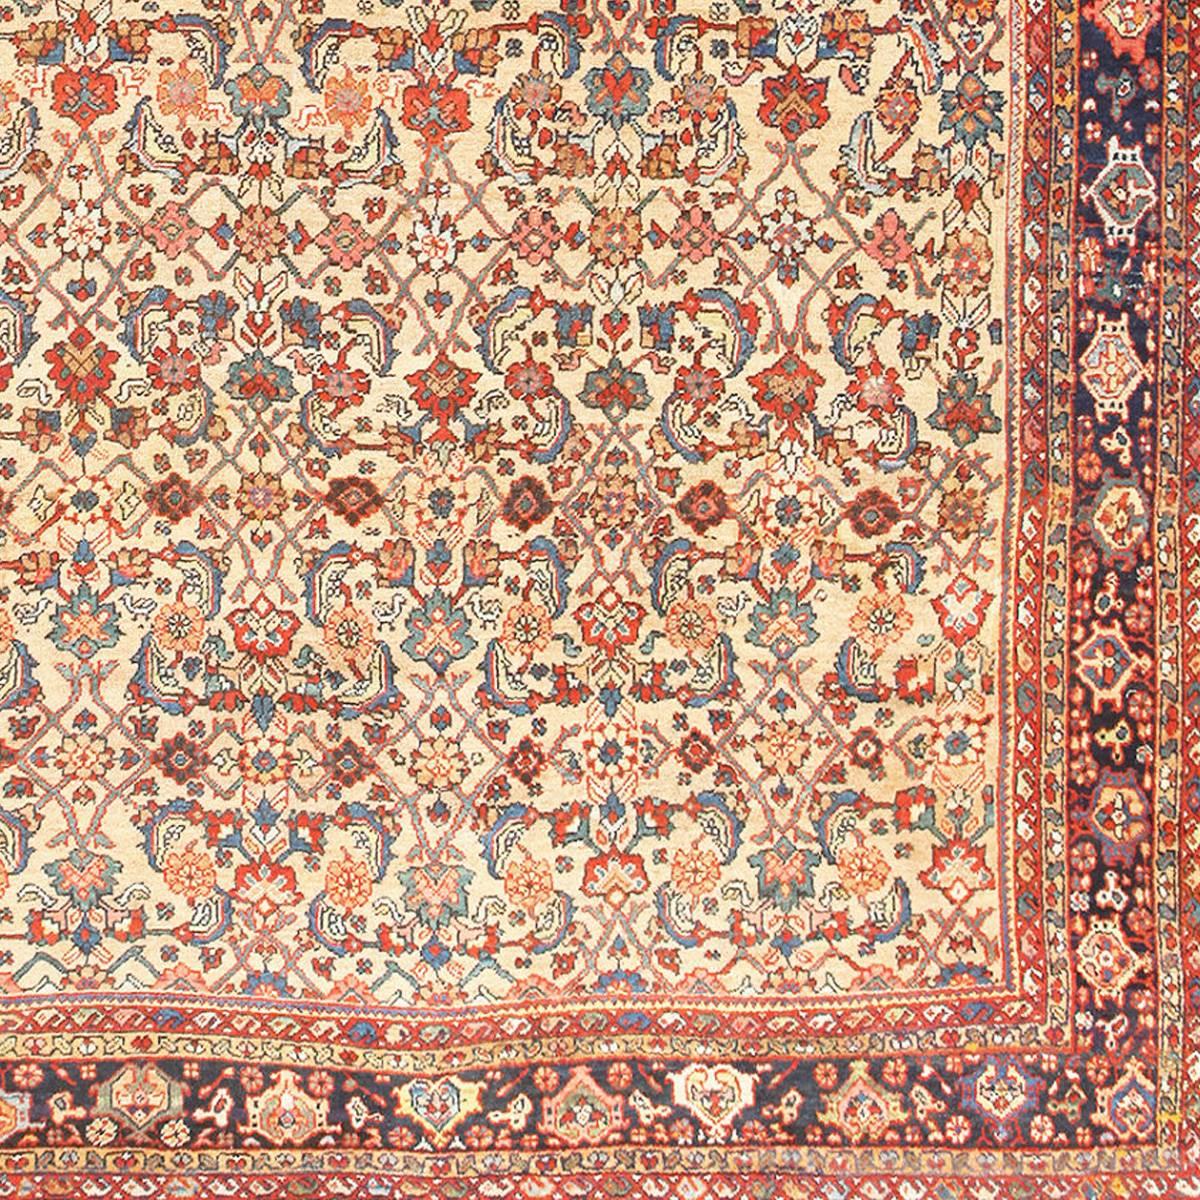 20th Century Camel Background Antique Persian Sultanabad Rug. Size: 10 ft 4 in x 12 ft 9 in